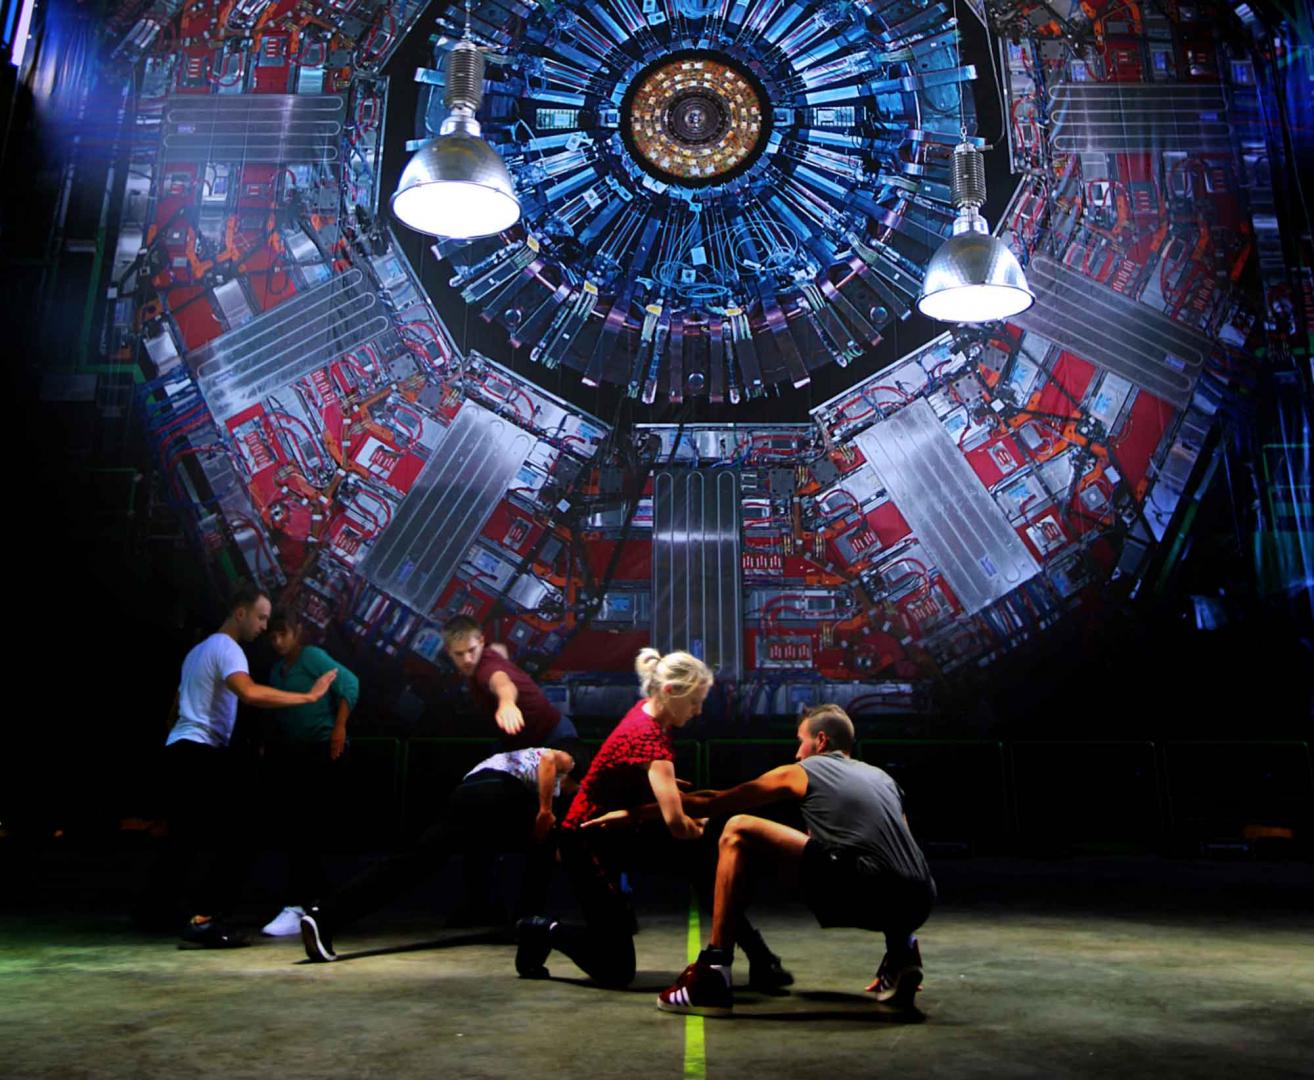 QUANTUM leaps: CERN artists team up for performance at CMS